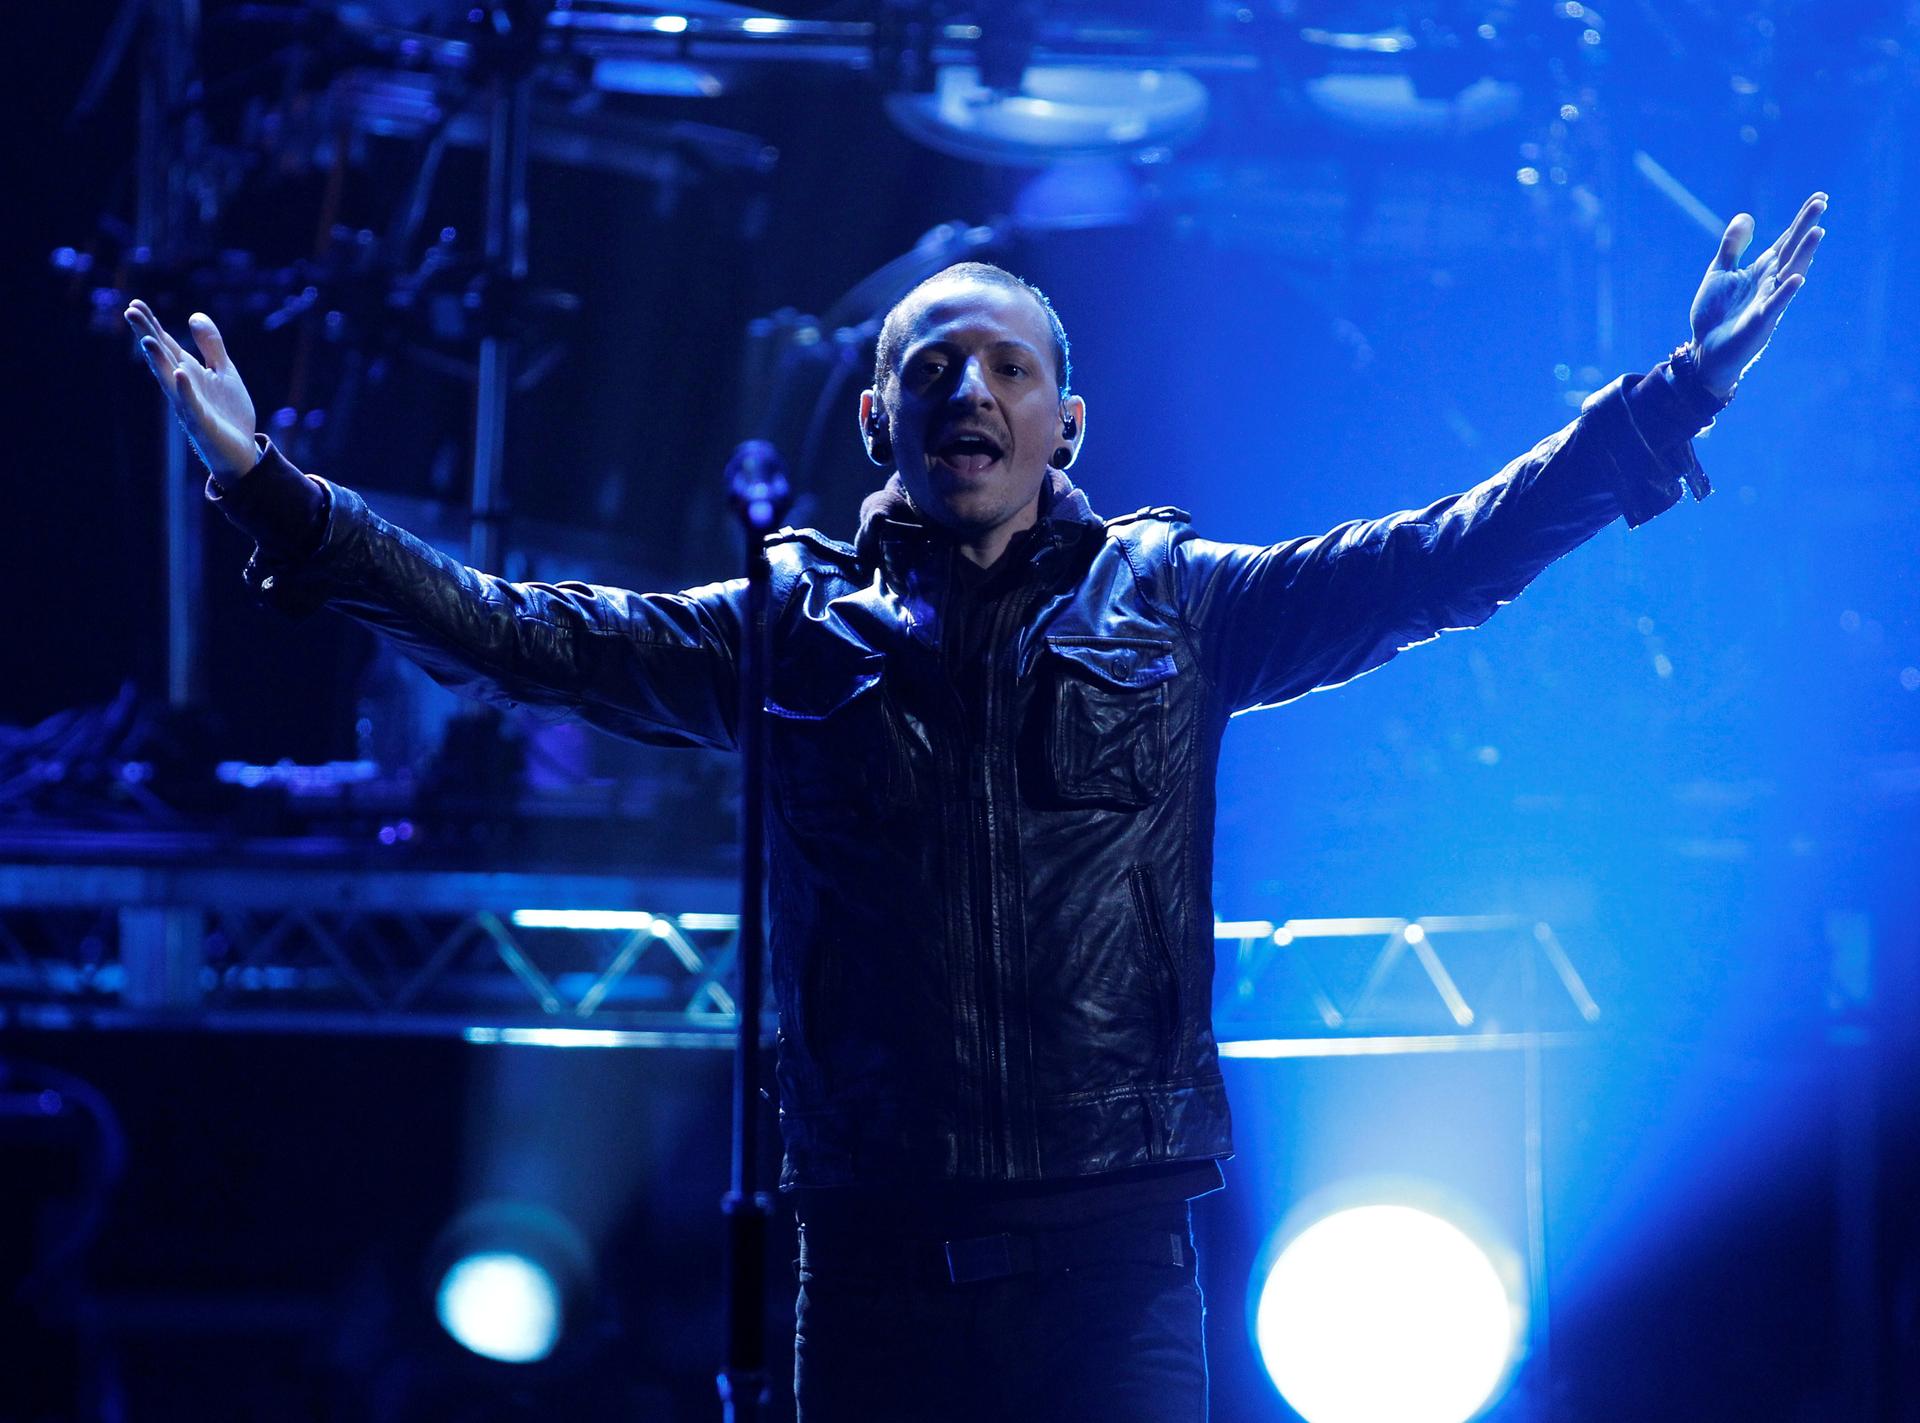 Chester Bennington of Linkin Park performs "Burn It Down" at the 40th American Music Awards in Los Angeles, California, November 18, 2012.